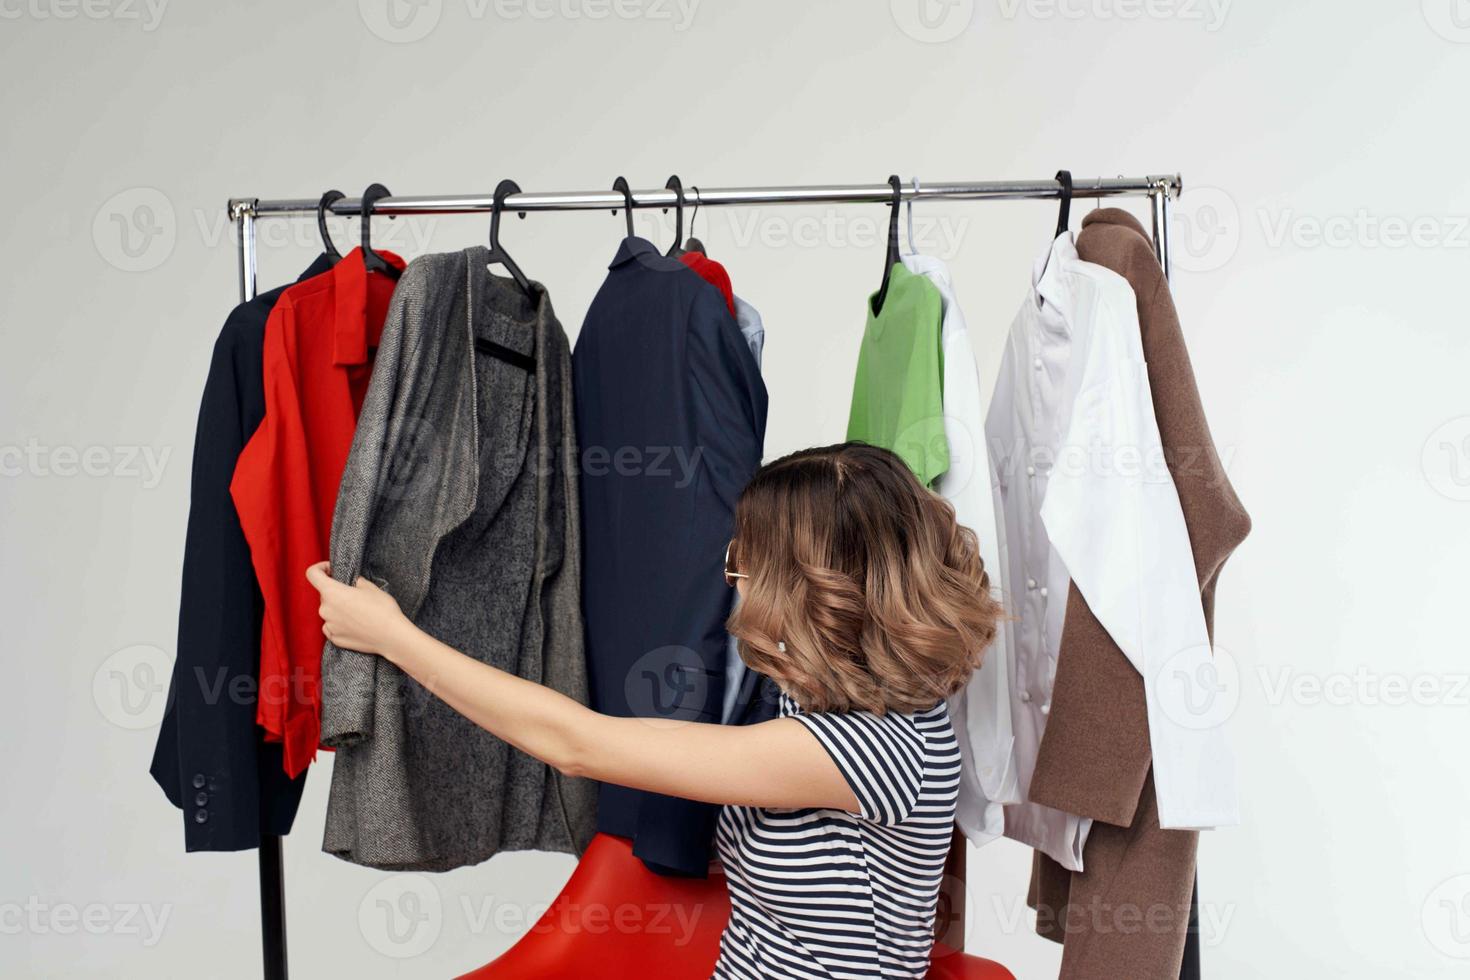 cheerful woman with glasses next to clothes fashion fun emotions photo